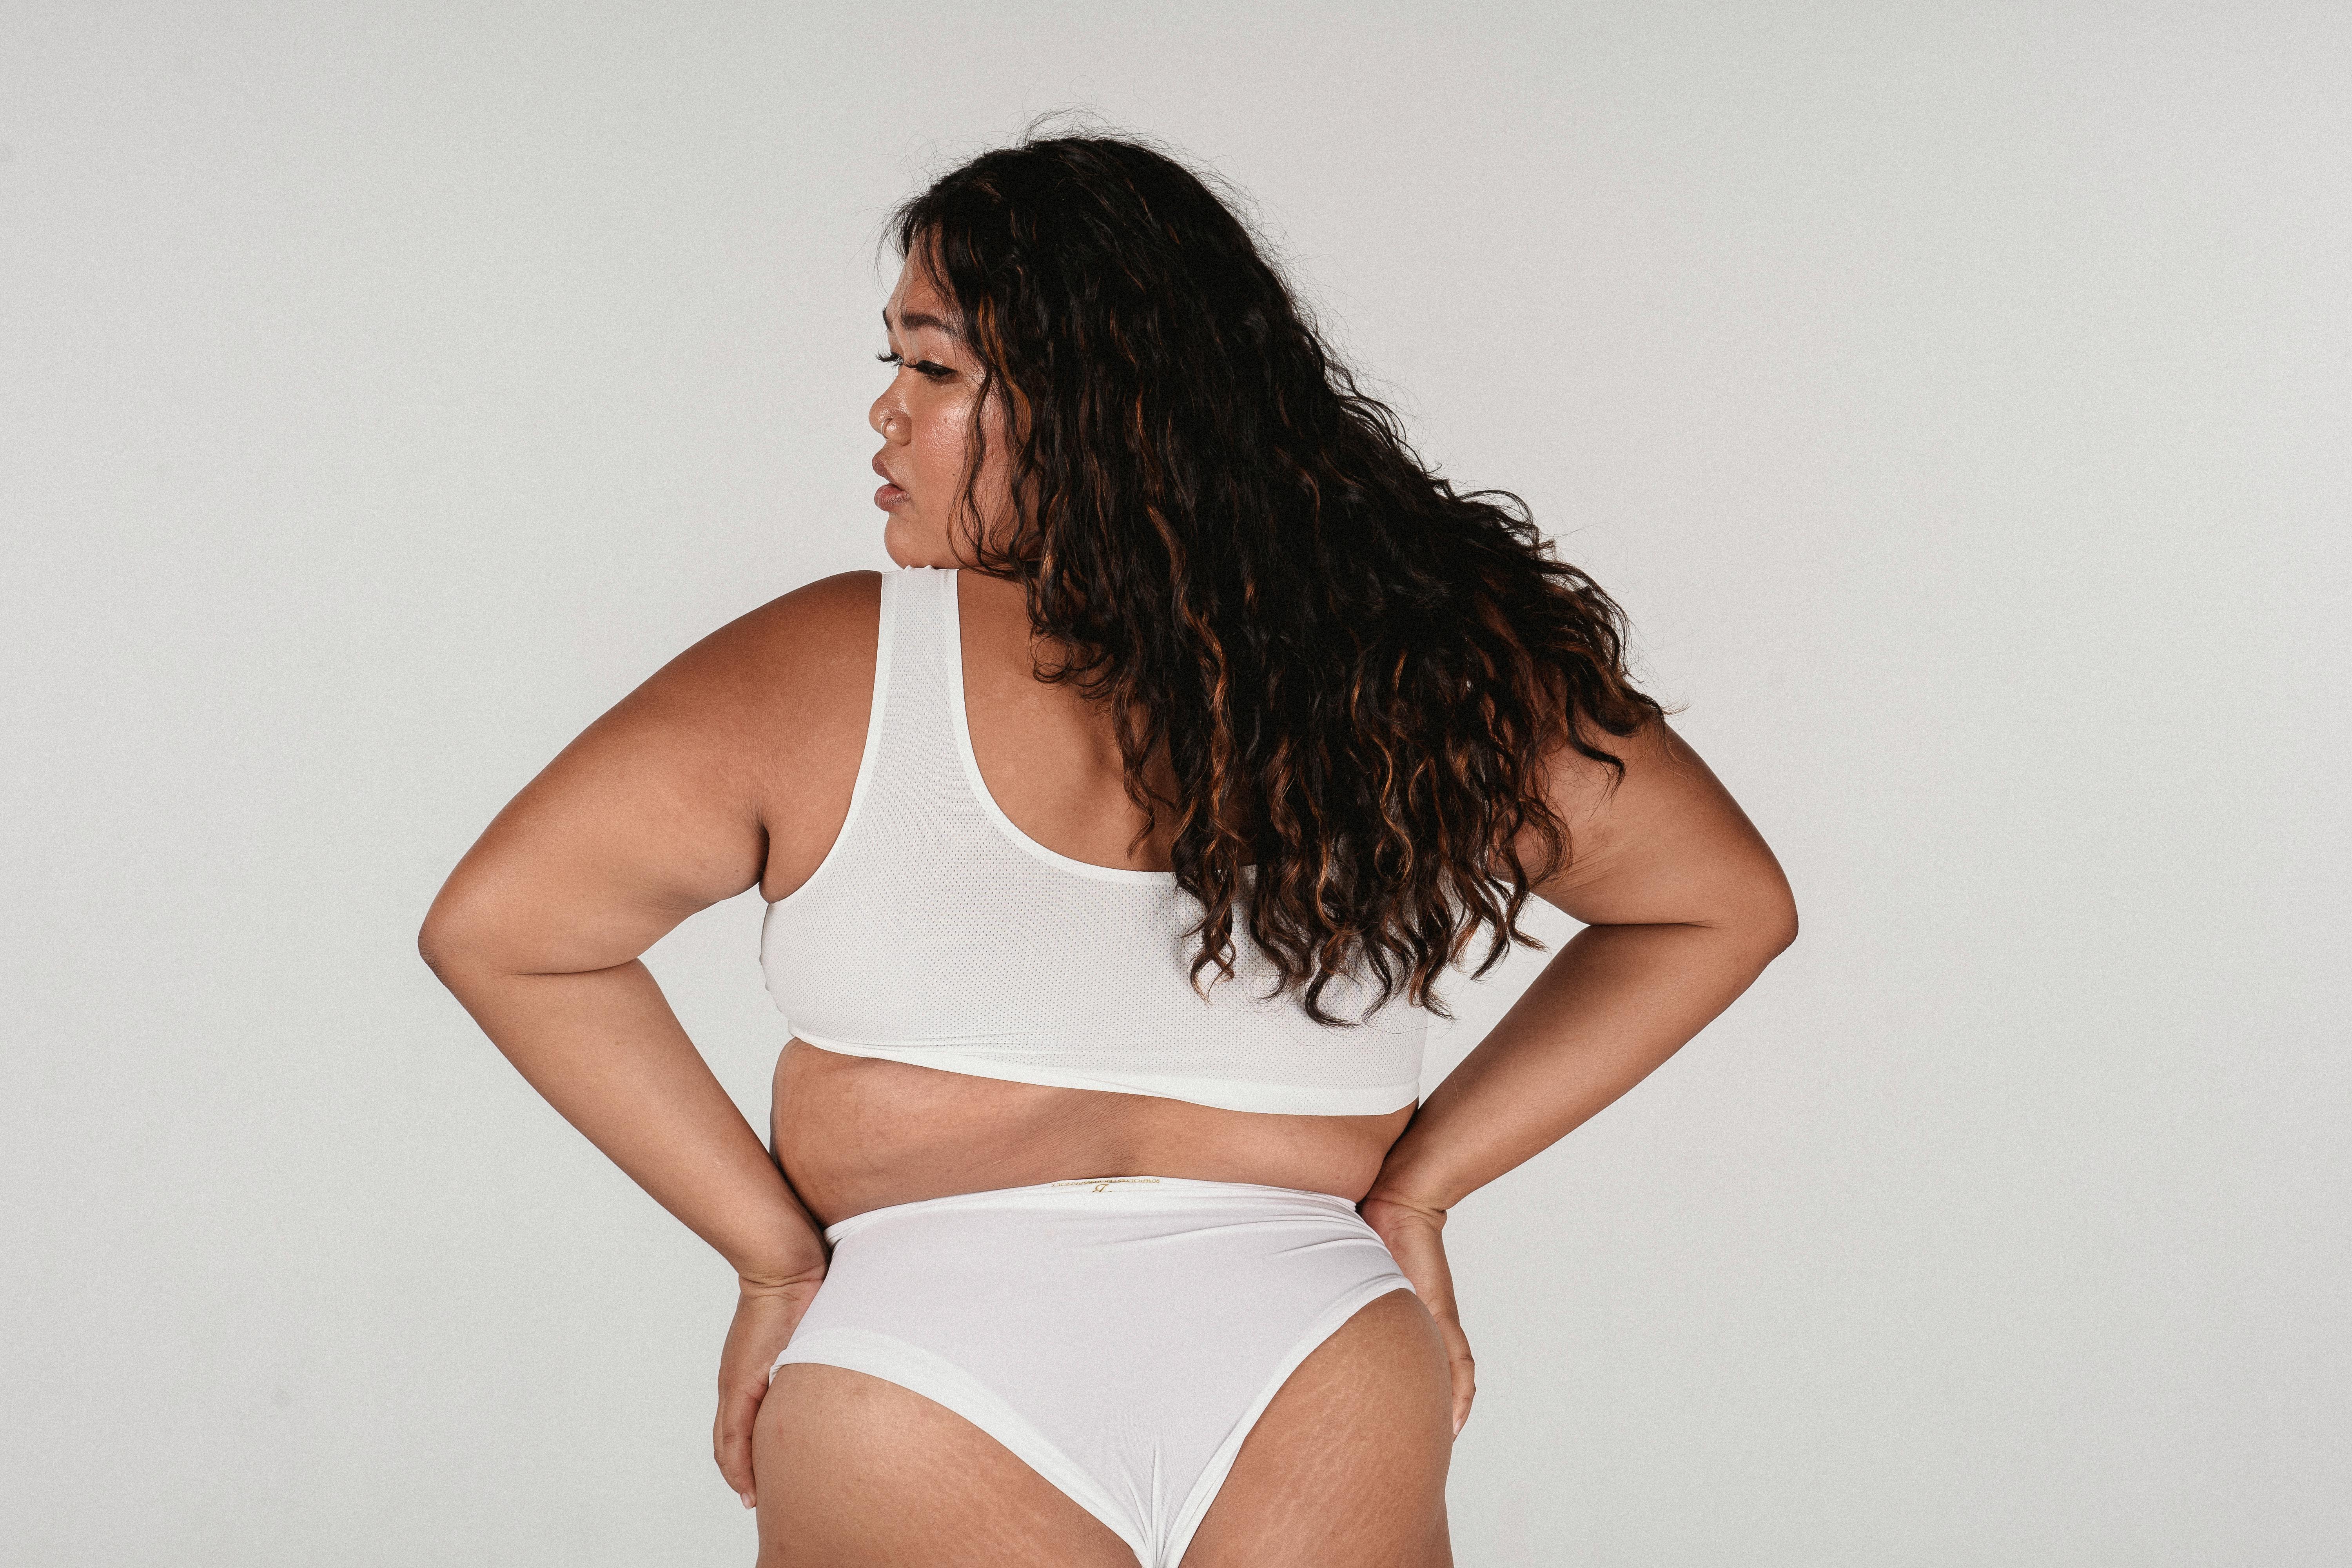 Overweight woman with long hair in underwear · Free Stock Photo